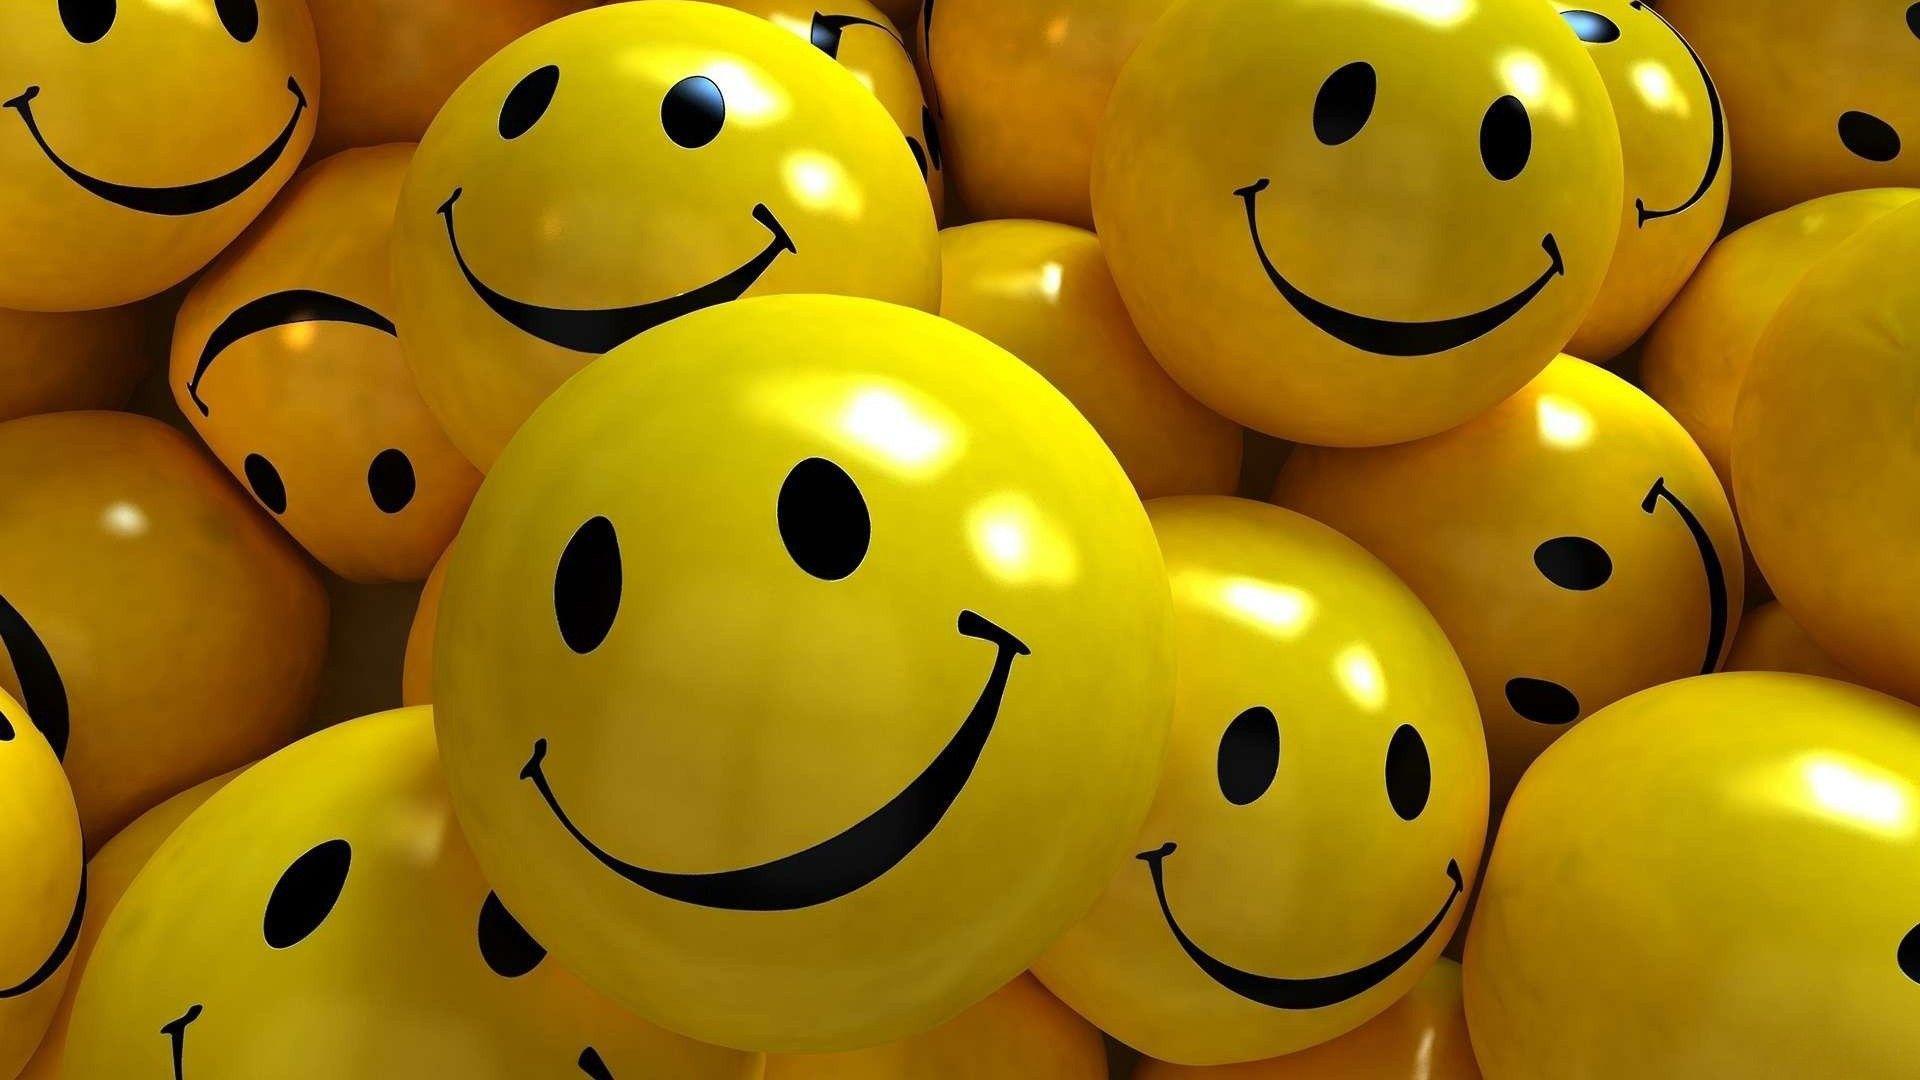 International Day Of Happiness Wallpaper Smiley Balls